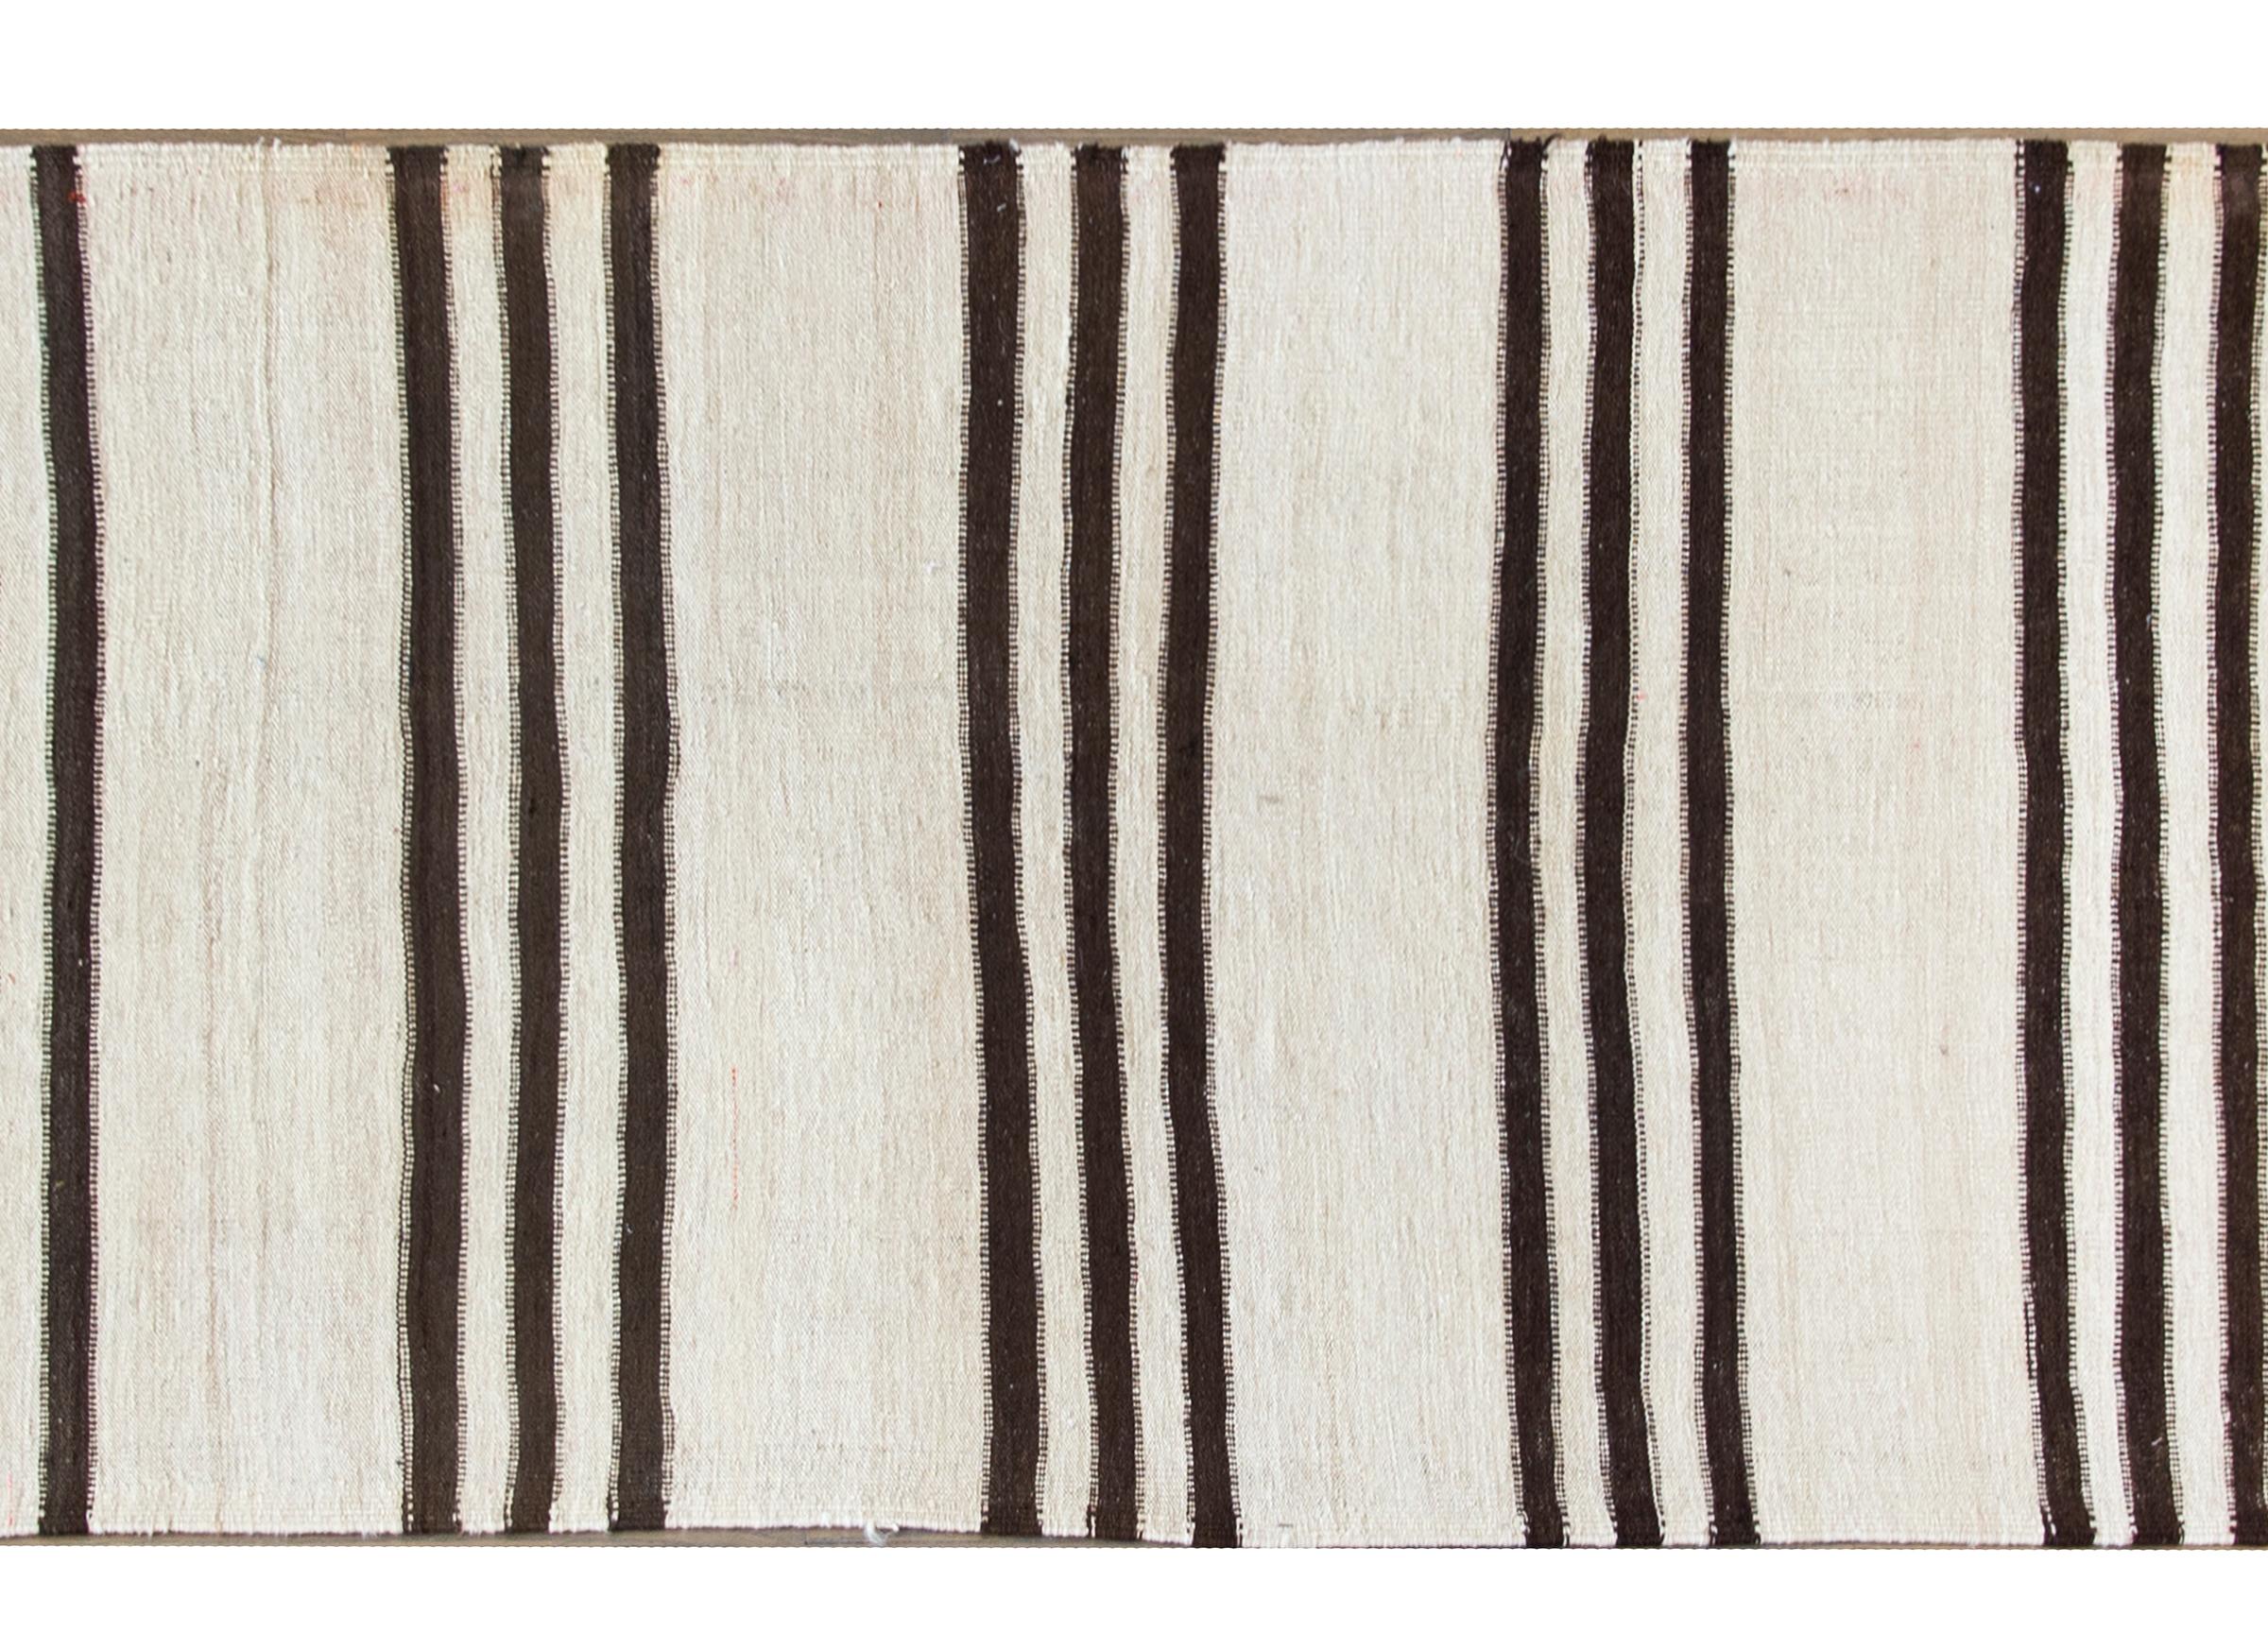 A wonderfully modern yet rustically chic vintage Persian Gabbeh runner woven in brown and natural wool colored stripes.